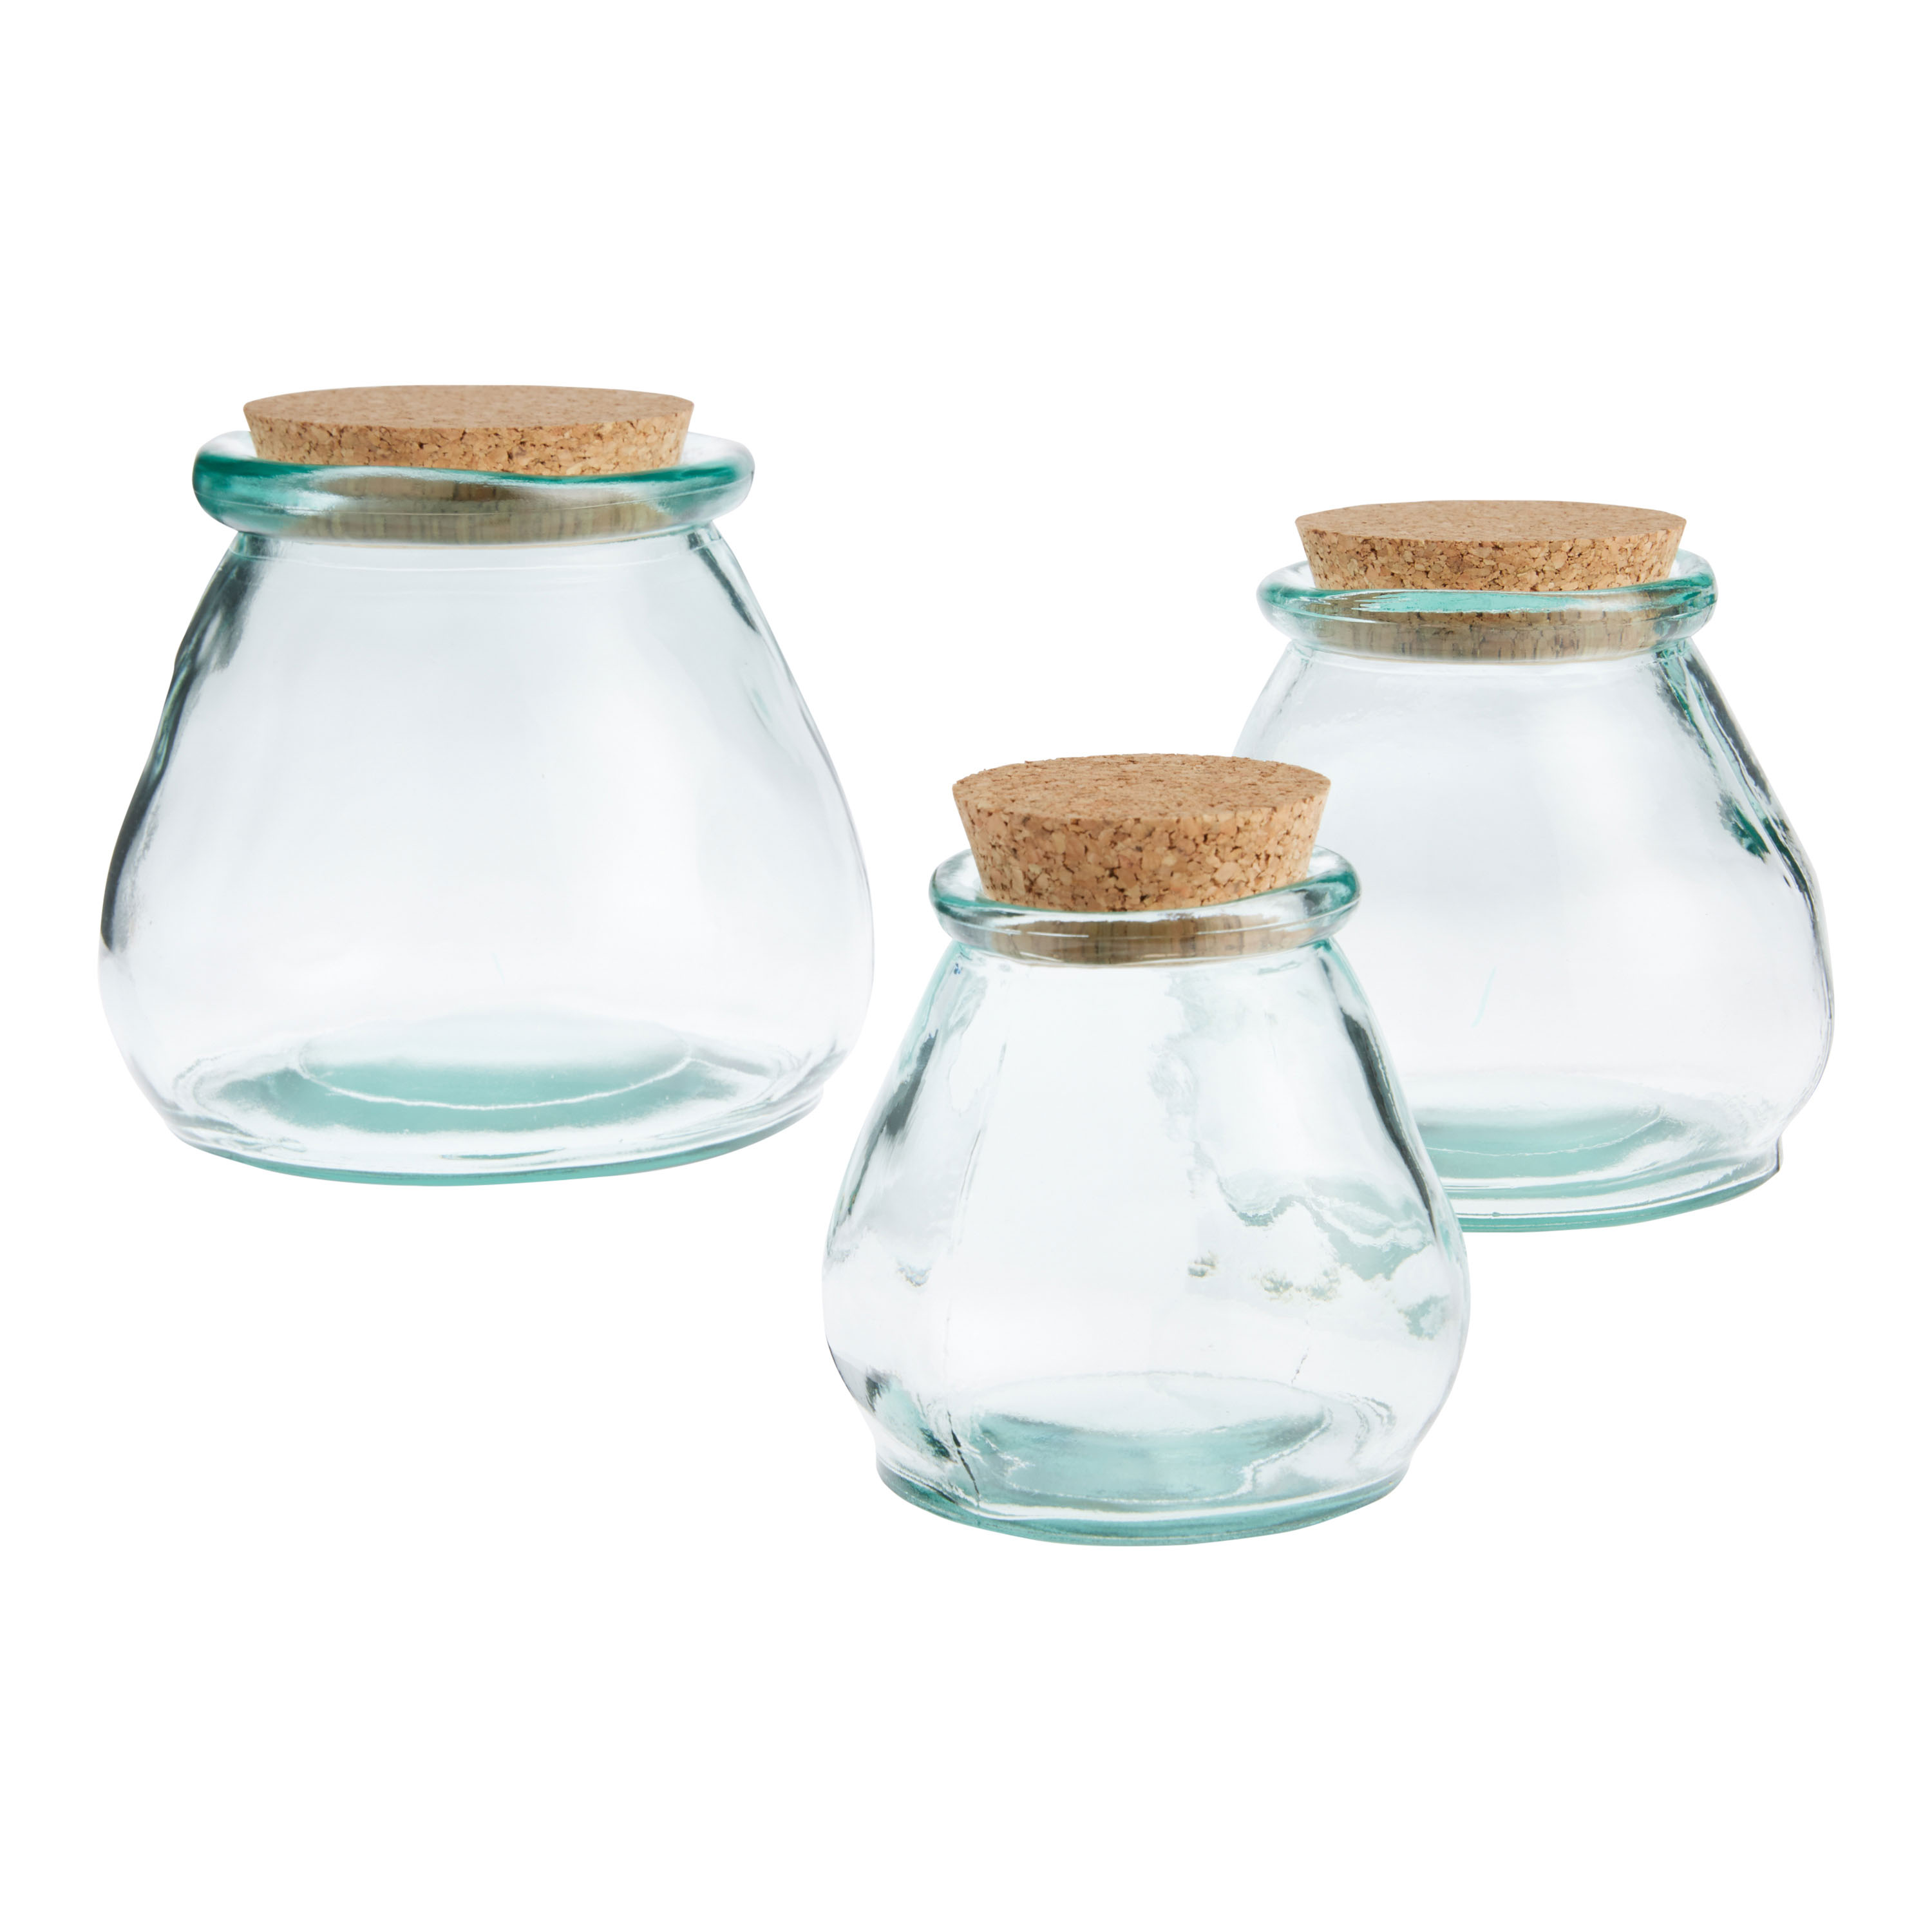 Barcelona Recycled Glass and Cork Spice Jar Set of 2 by World Market